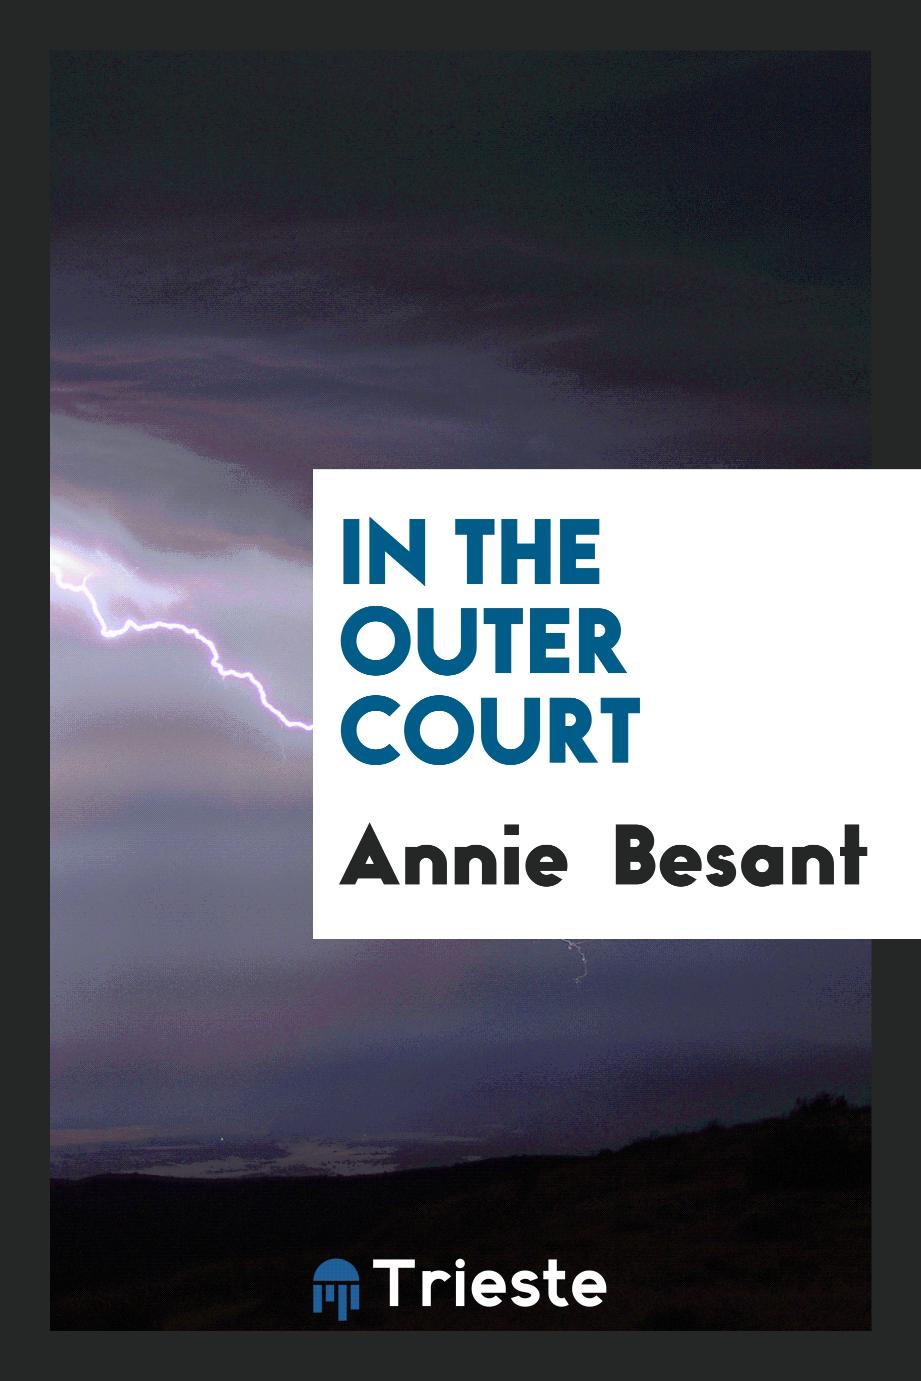 Annie Besant - In the outer court